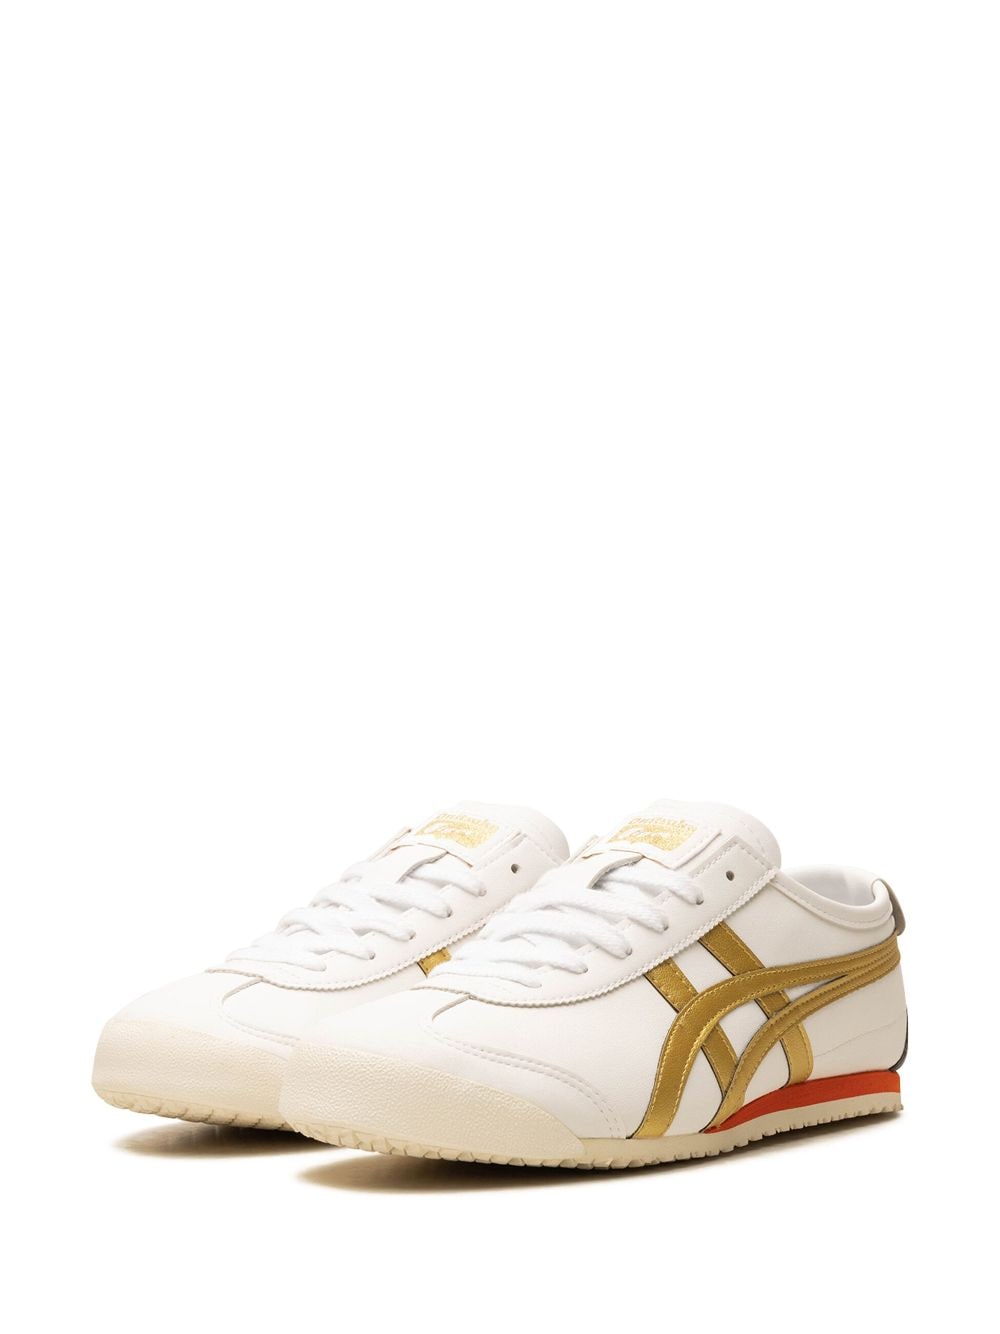 Shop Onitsuka Tiger Mexico 66 "white/gold" Sneakers